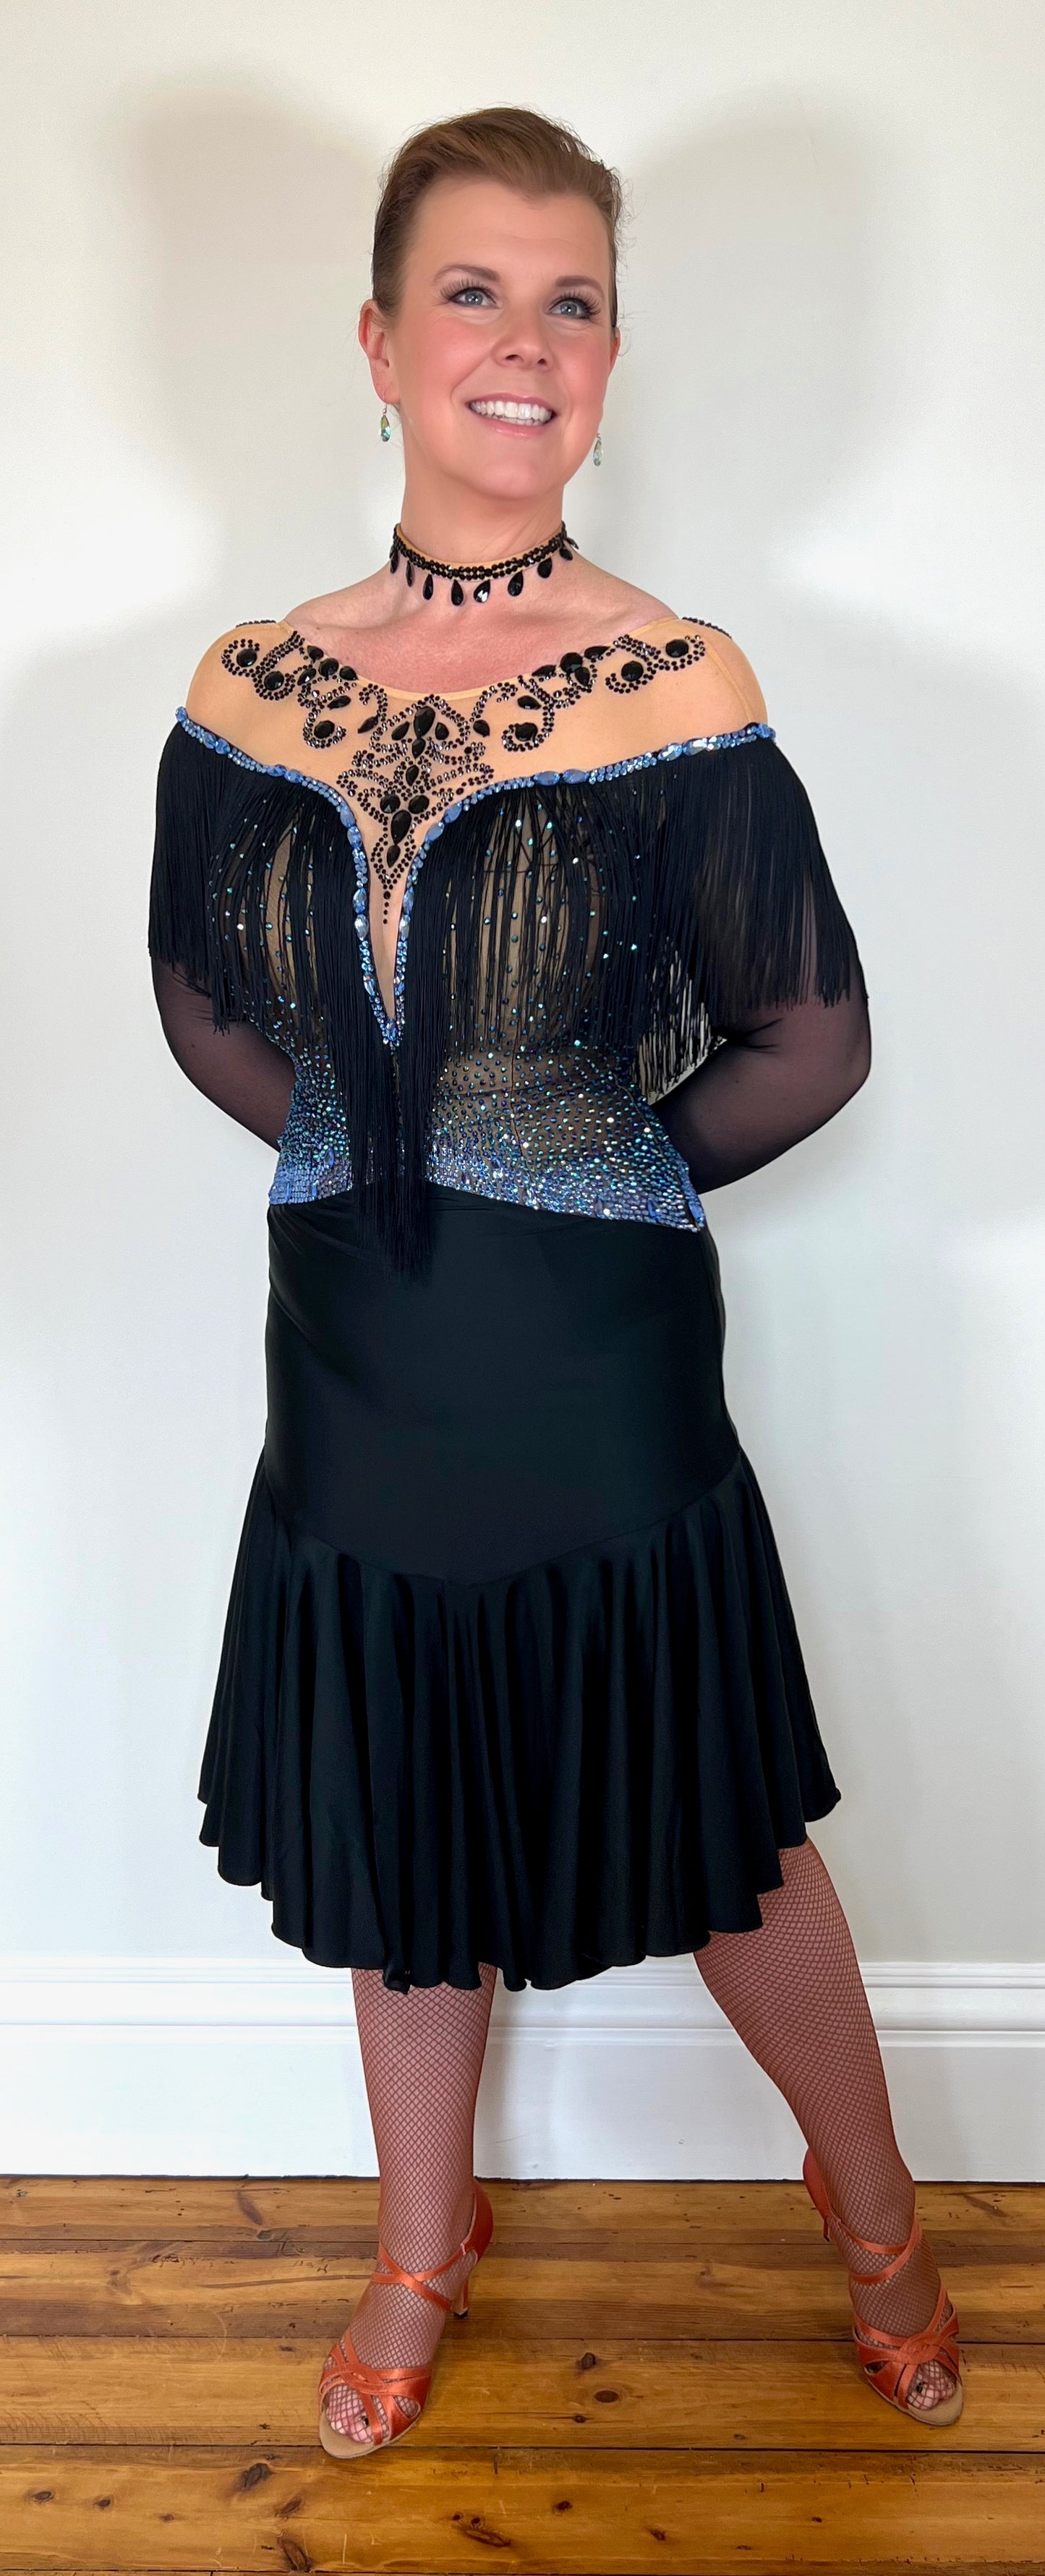 0012 Black Competition Latin Dress. Stoned in Sapphire AB & Jet stones. Off the shoulder effect mesh. Black fringe detail to front & back. Full frill skirt giving lovely movement.